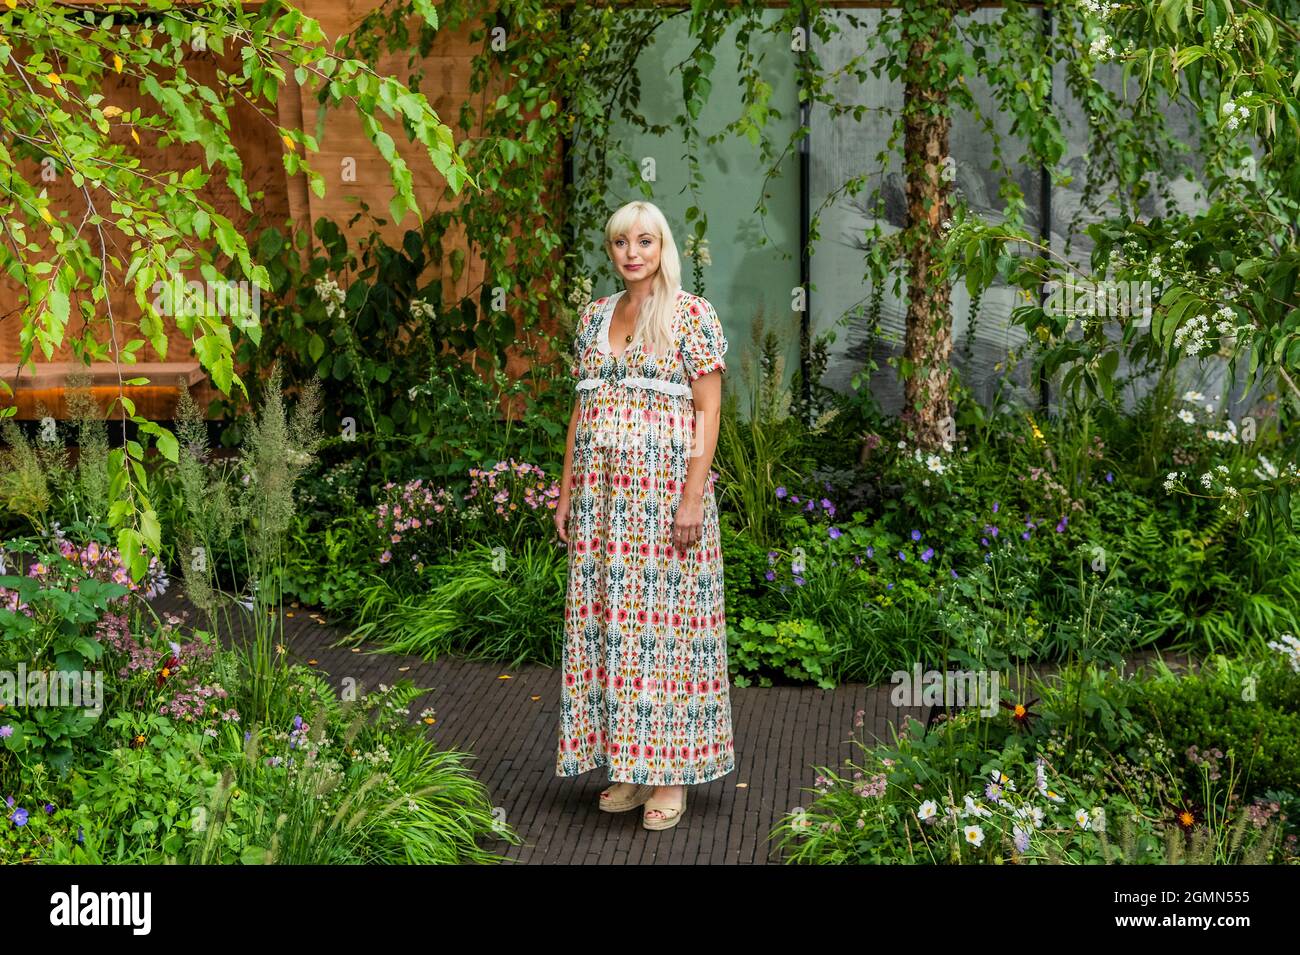 London, UK. 20th Sep, 2021. Helen George, from call the midwife, and four Nightinmgale nurse visit The Florence Nightingale Garden: A Celebration of Modern-Day Nursing Designed by Robert Myers - The 2021 Chelsea Flower Show. The show was cancelled last year due to the coronavirus lockdowns. Credit: Guy Bell/Alamy Live News Stock Photo